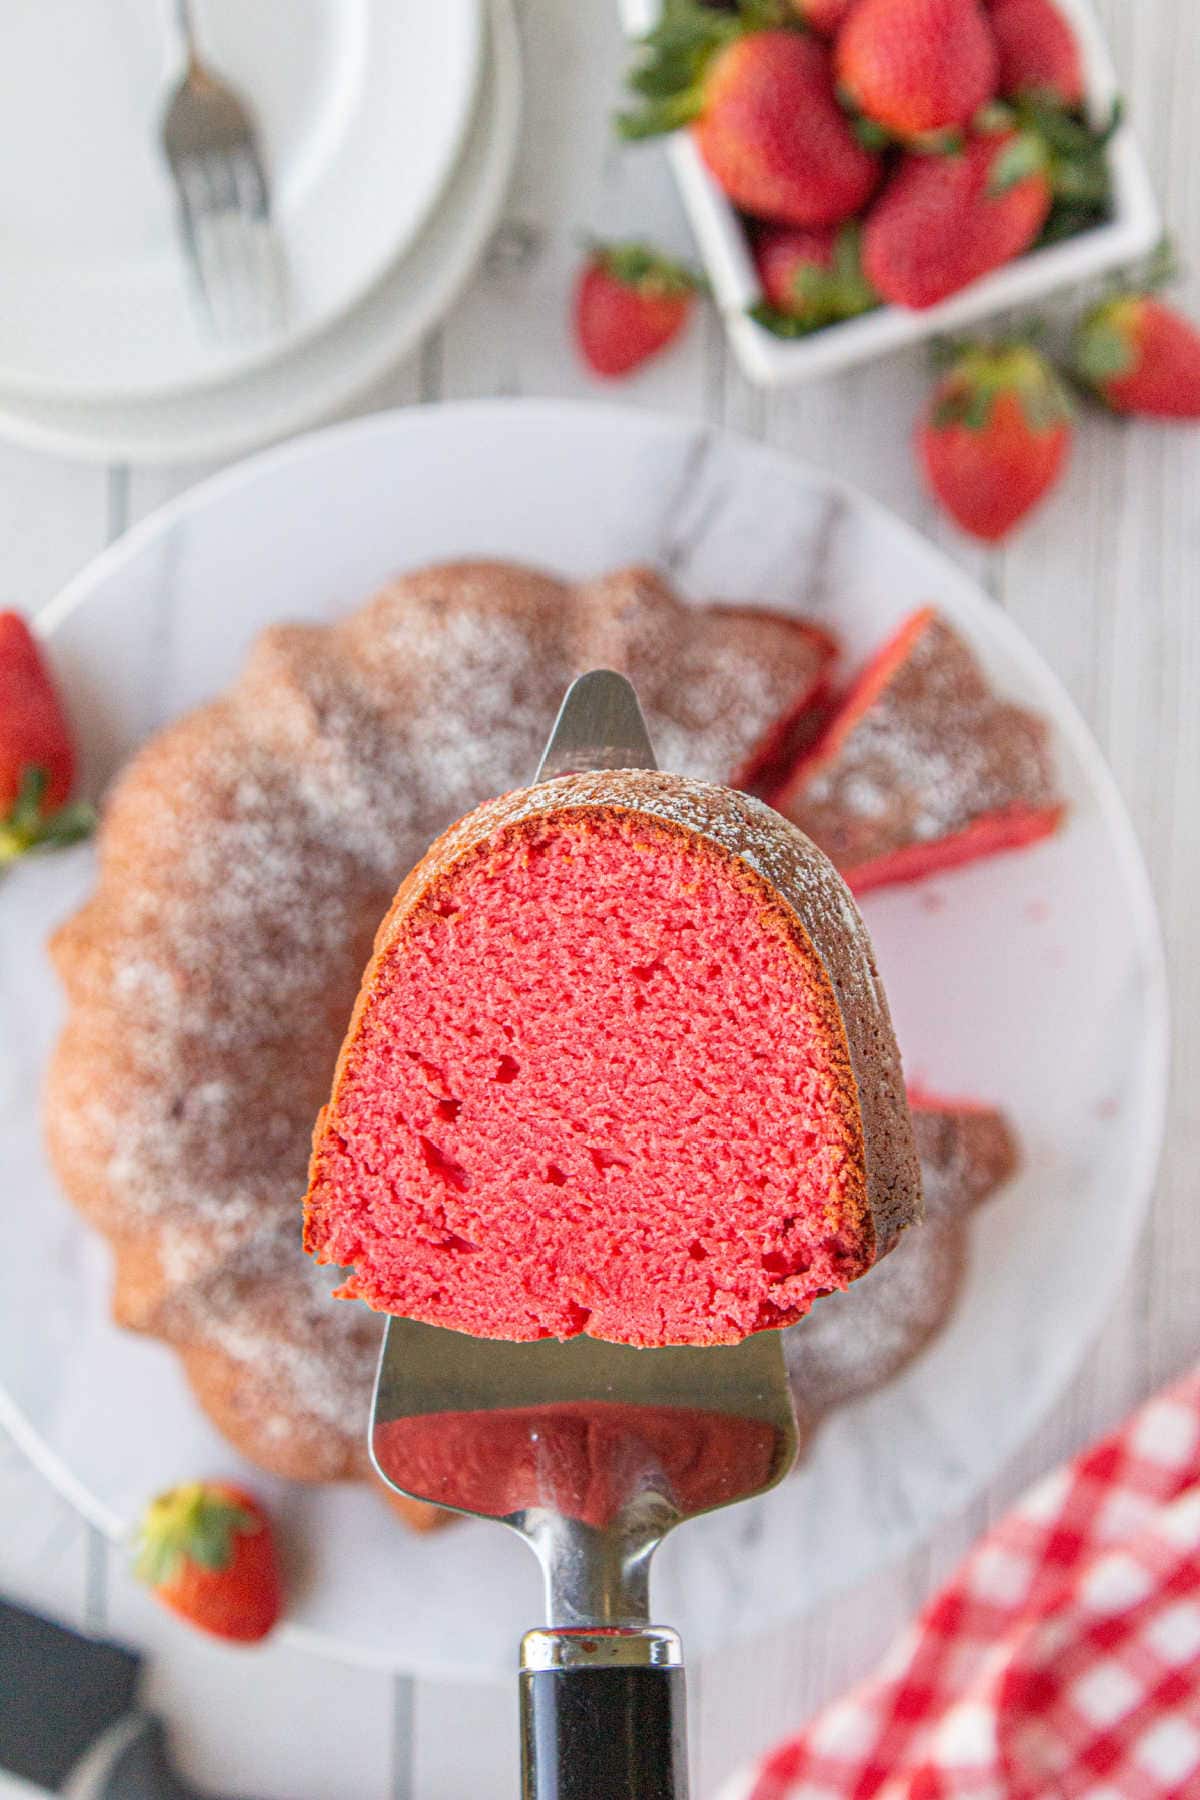 A cake server holds a slice of strawberry bundt cake over the sliced bundt cake and strawberries on marble counter and plate below.